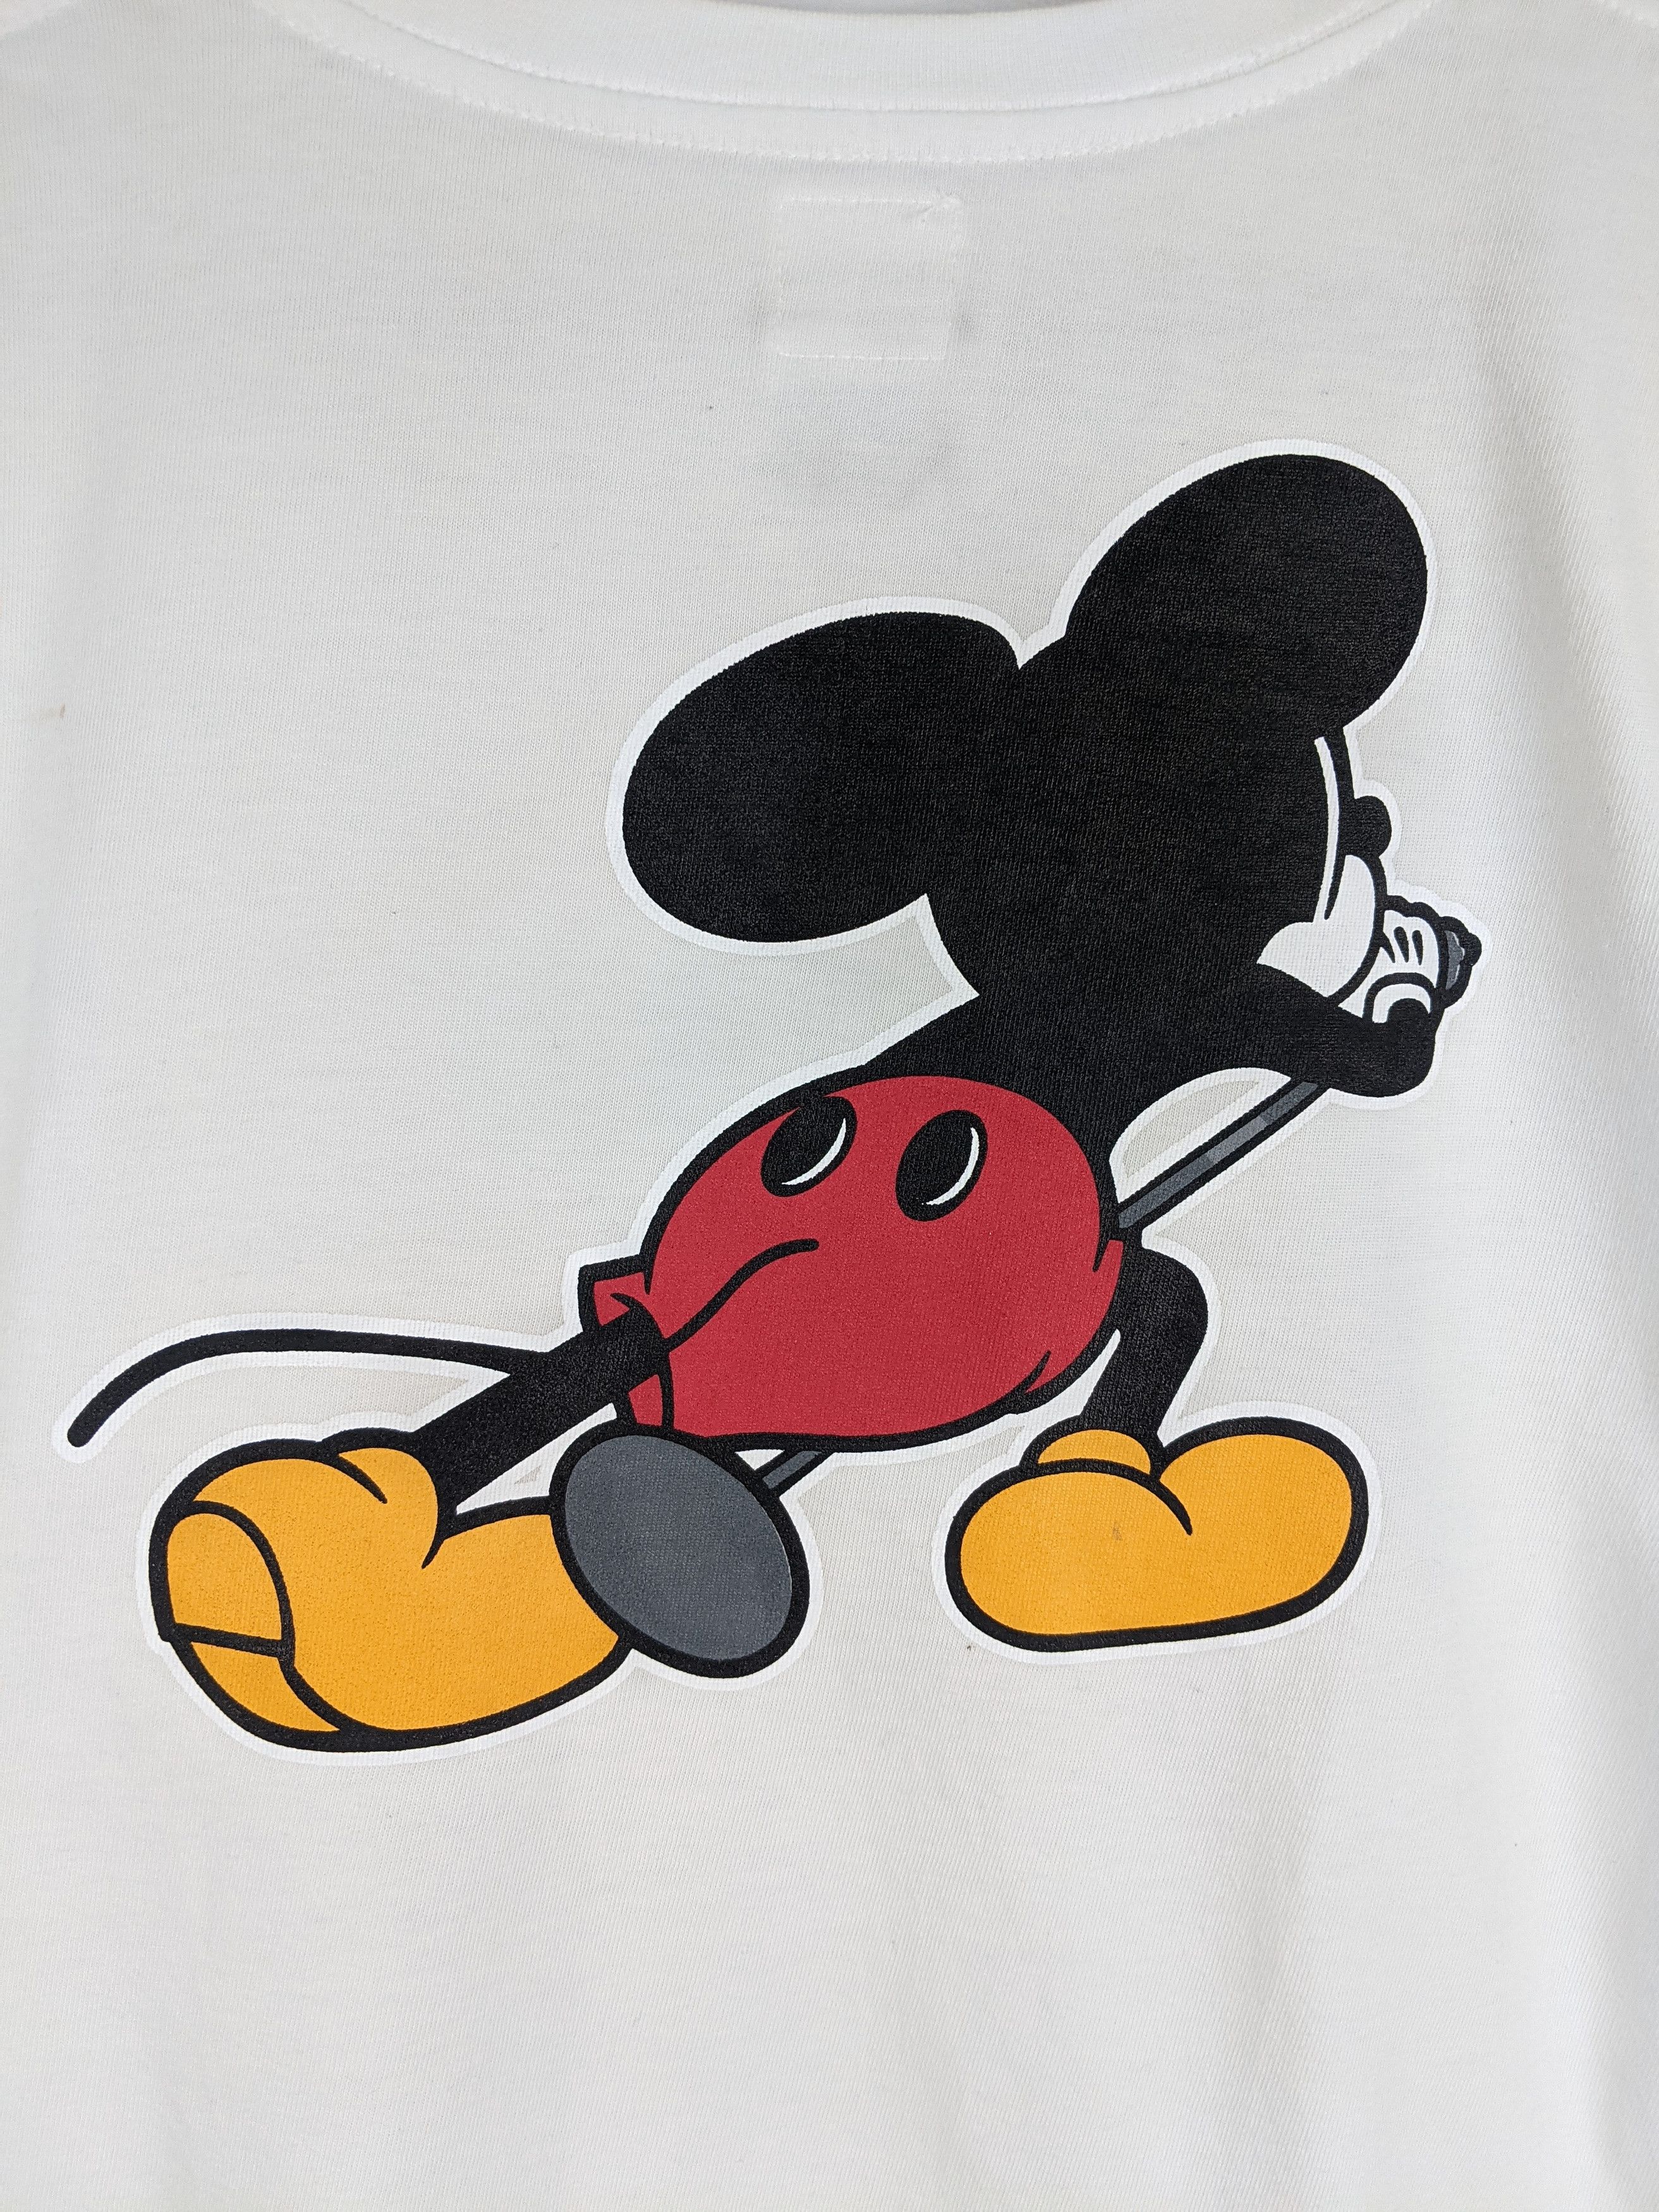 Numbernine x Mickey Mouse shirt - 4